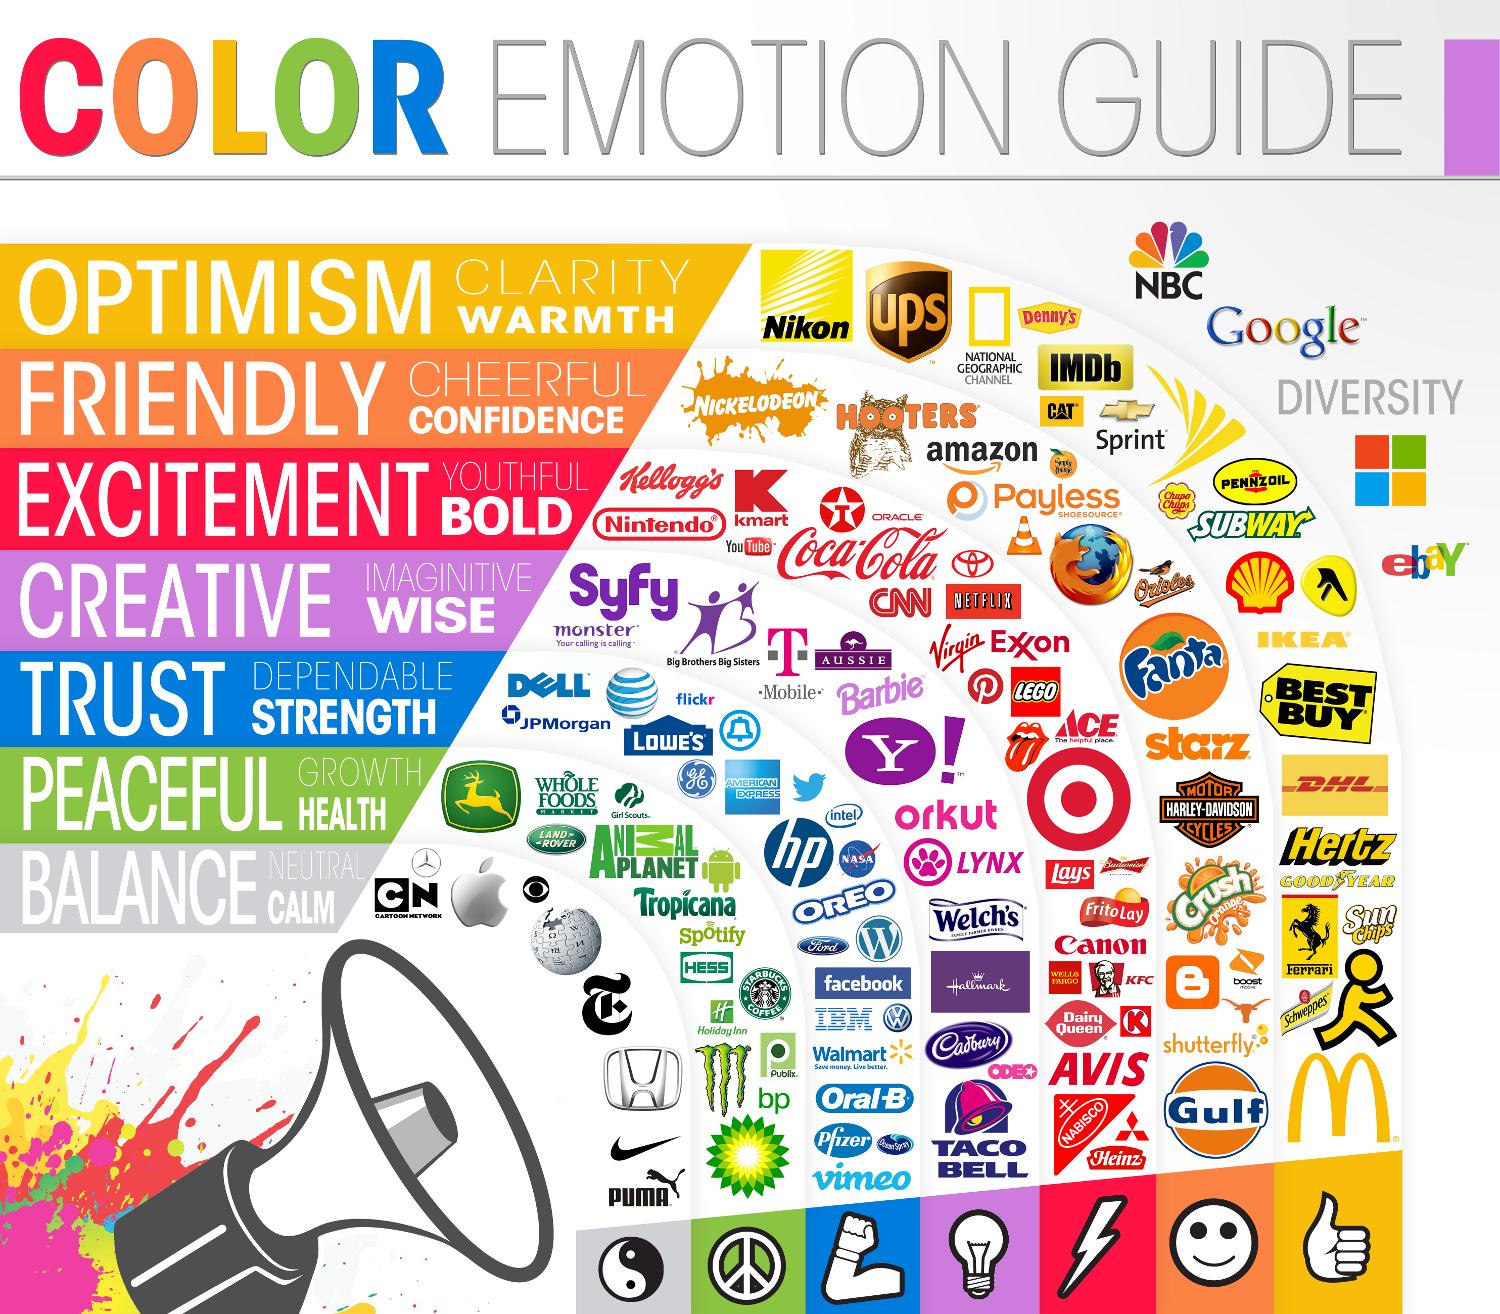 Localize colors to send a positive brand message